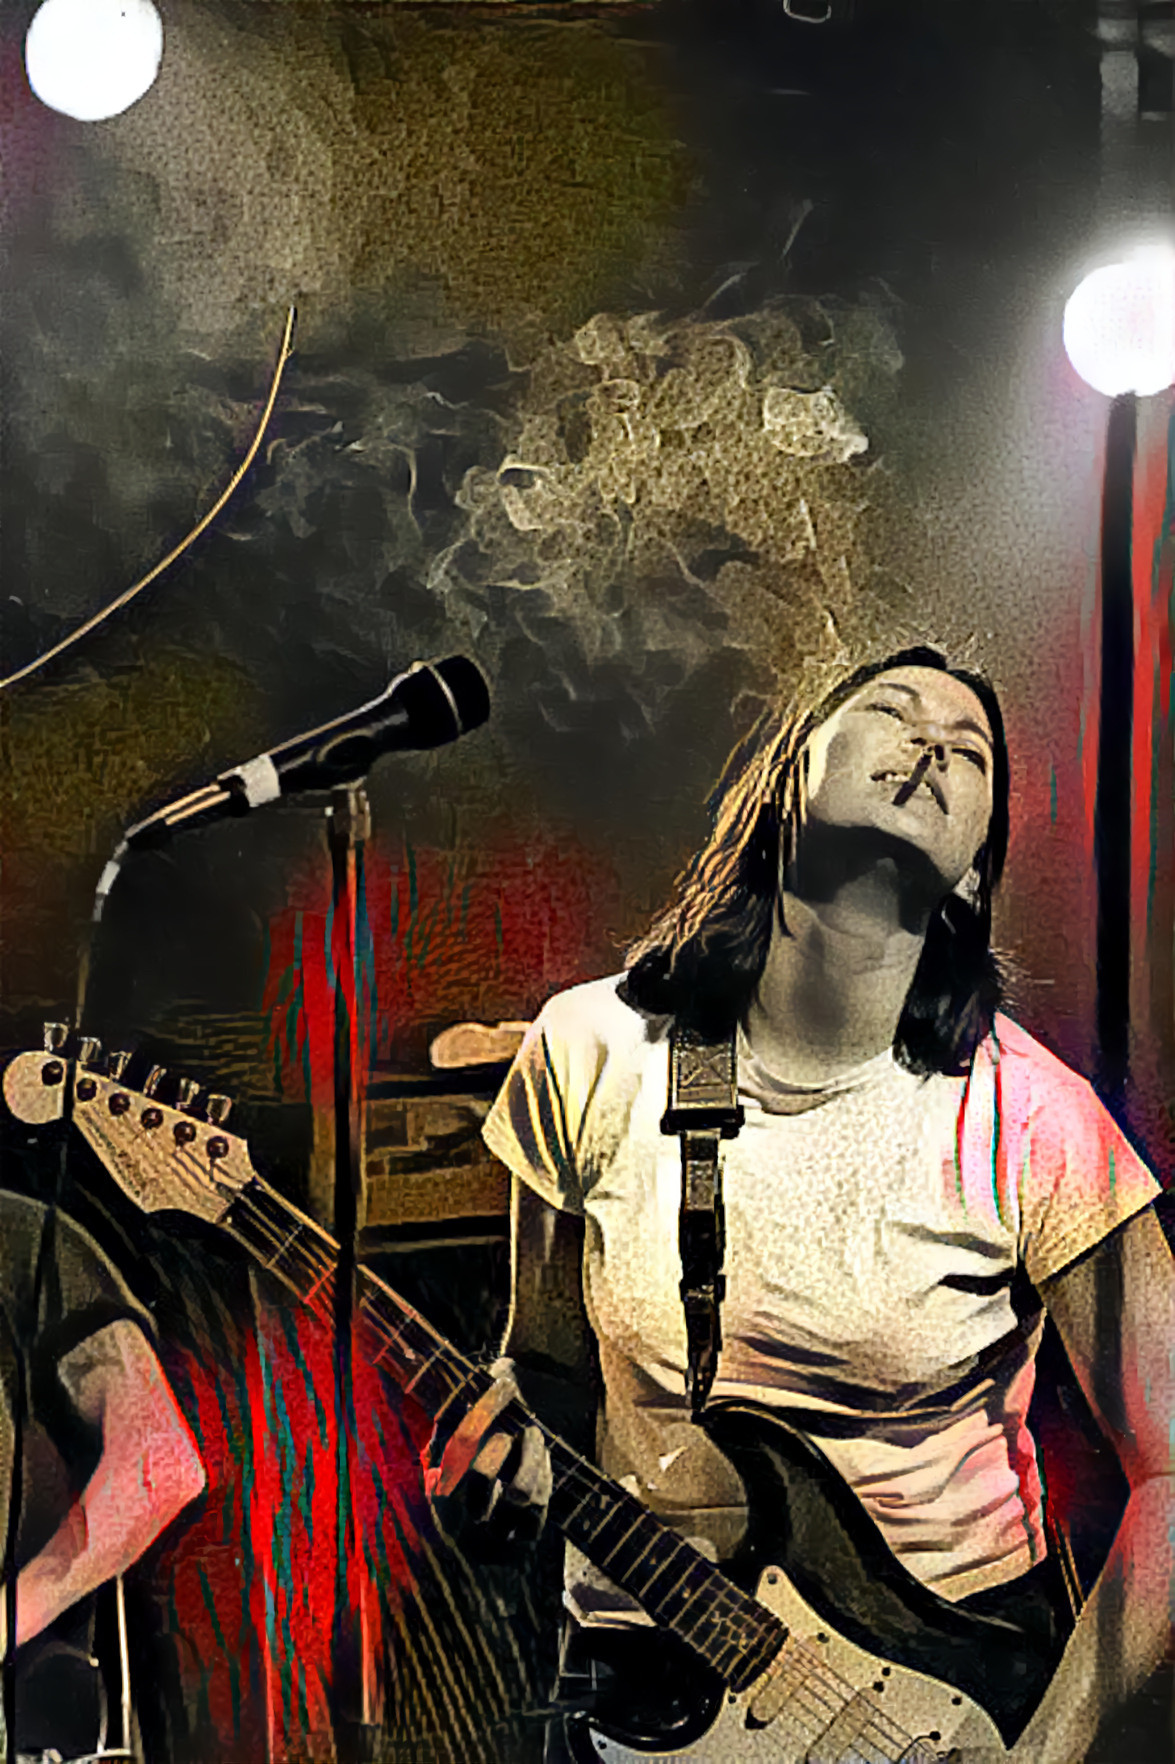 Deep Dream inspired by the Breeders’s Kim Deal